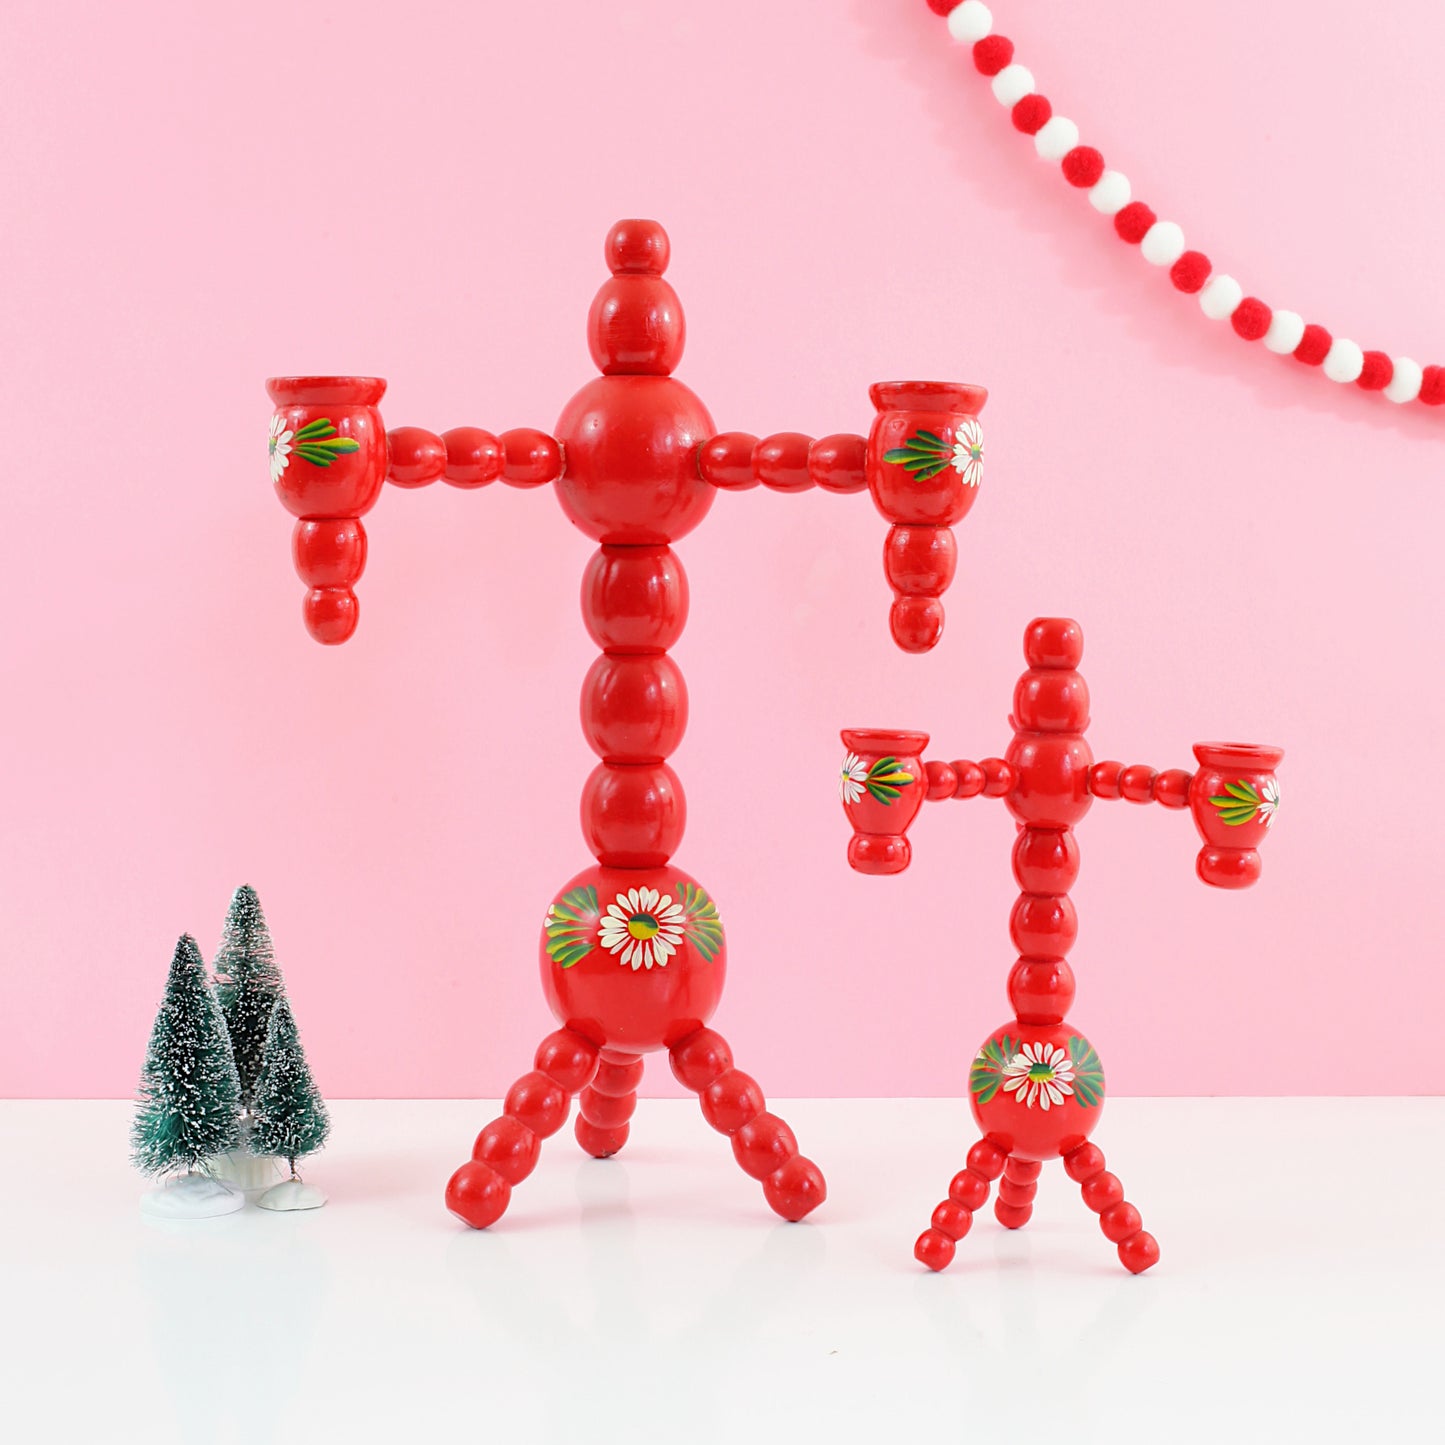 SOLD - Small Vintage Red Swedish Wood Ball Candelabra